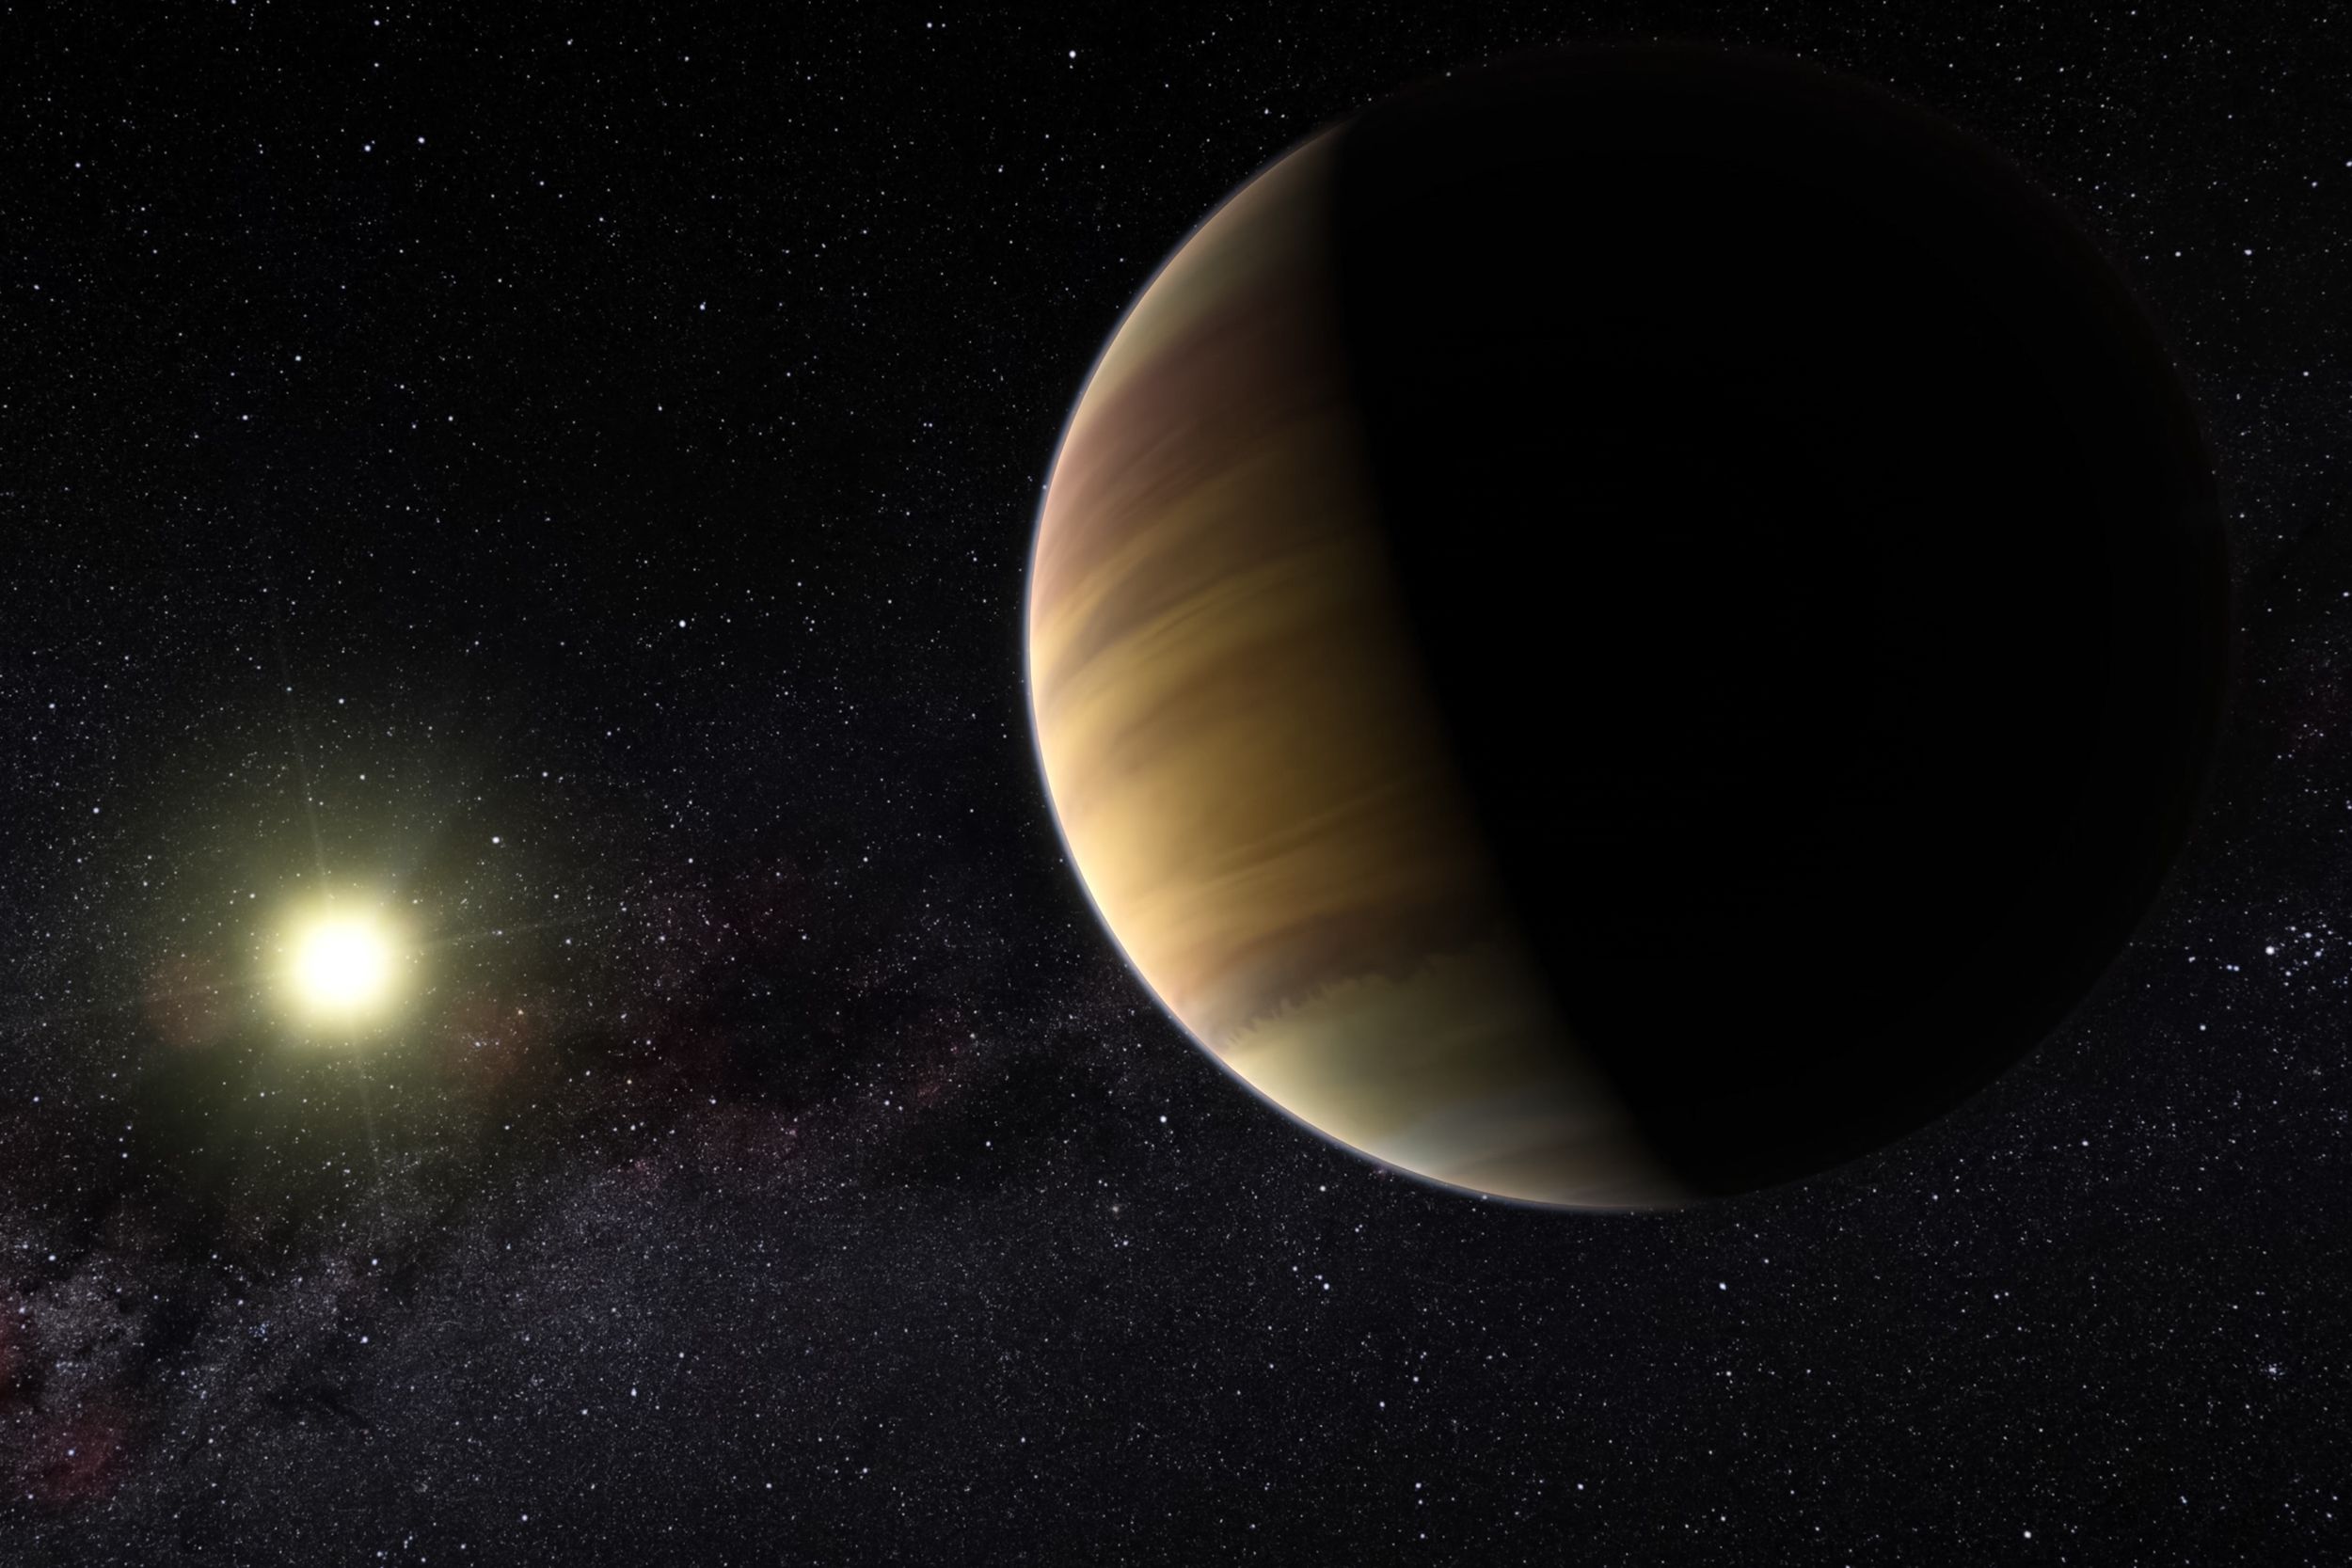 <p class="MsoNormal">No. The naming rights for a newly discovered planet go to <a href="https://solarsystem.nasa.gov/planets/overview/">the person who made the discovery</a>. So as tempting as it might be to give it some way cool name out of science fiction, the name will almost certainly end up being the name of a lucky scientist or astronomer whose diligent work has led to the discovery of a new world.</p>